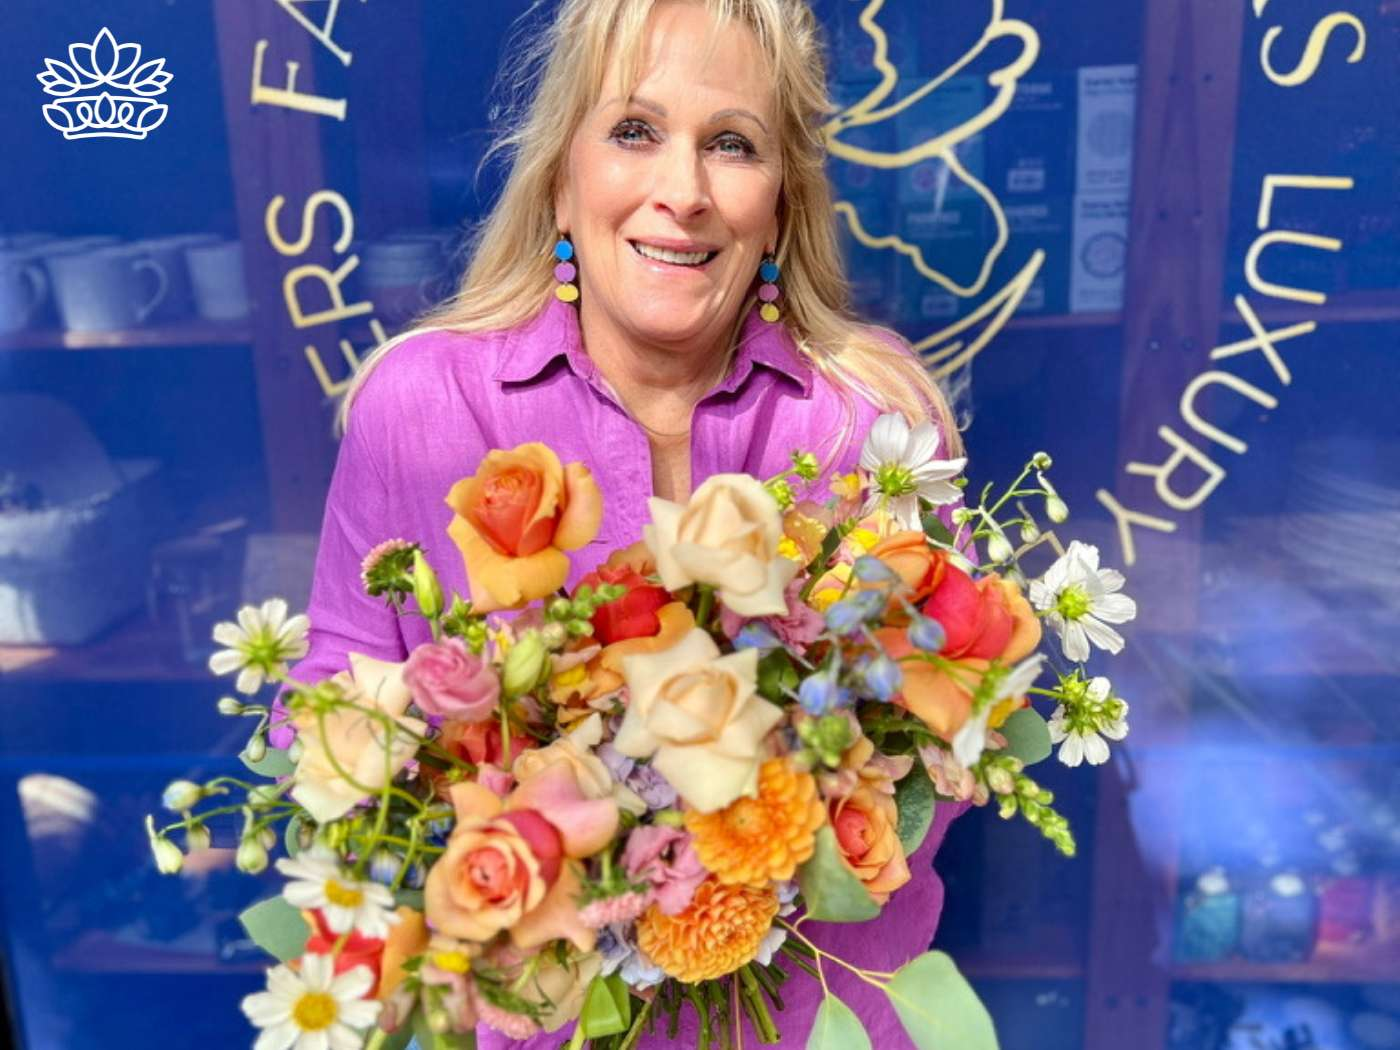 Happy woman presenting a bouquet from the Eid Flowers Collection, conveying Eid Mubarak wishes for Eid Al-Fitr and Eid Al-Adha celebrations, embodying the joy of Eid ul-Fitr, offered by Fabulous Flowers and Gifts.